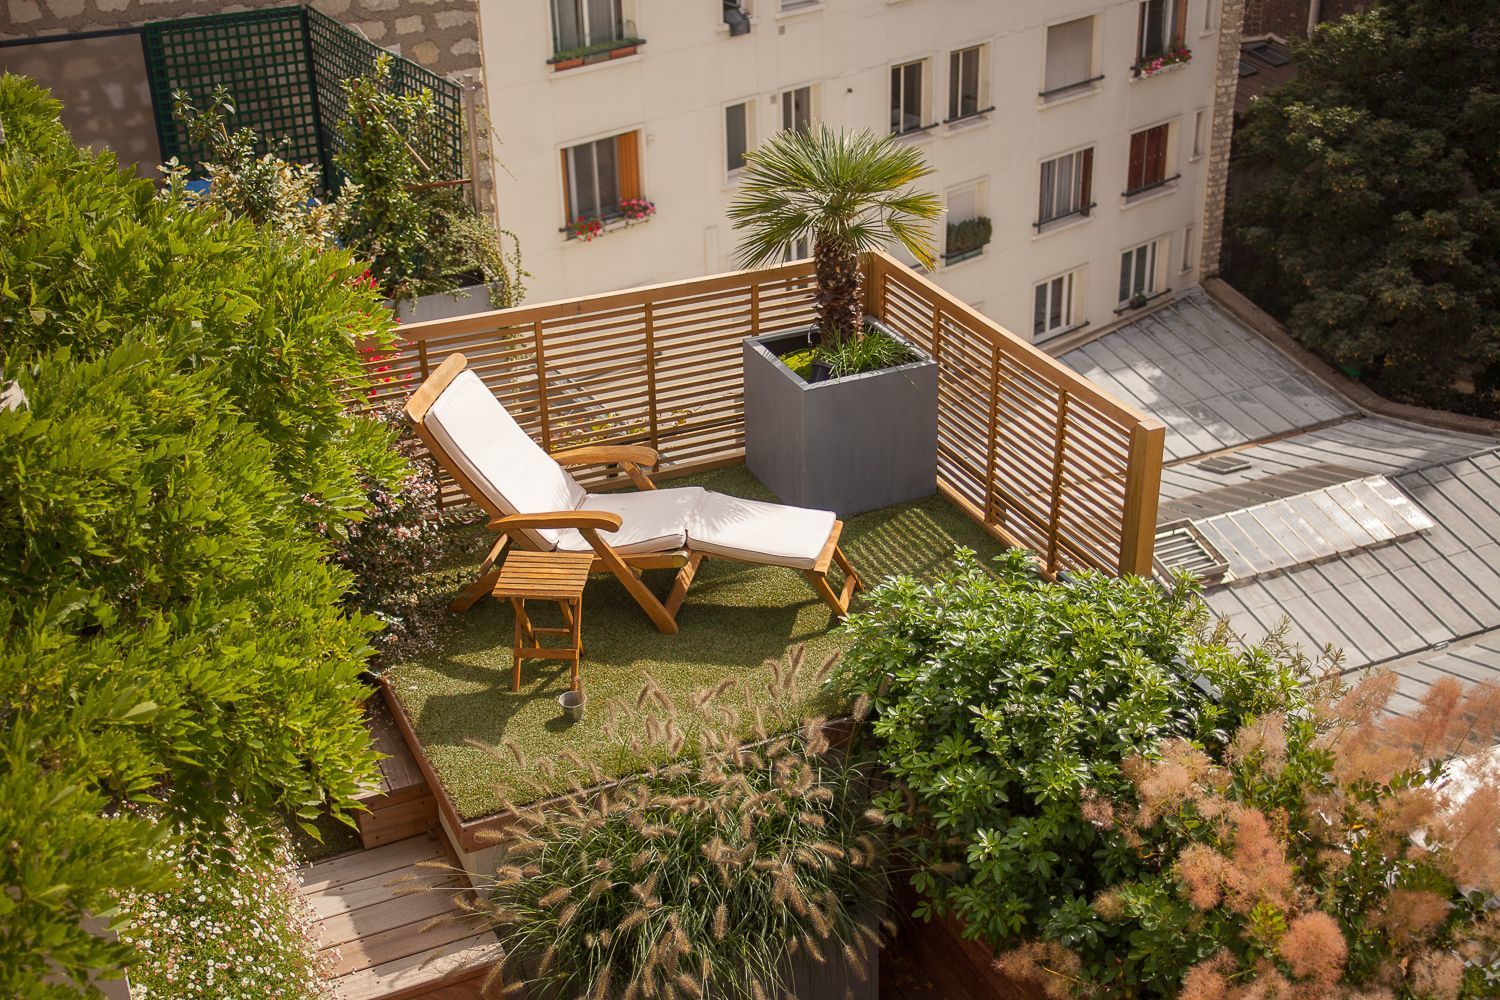 Aménager Une Grande Terrasse : 10 Solutions Possibles ... concernant Amenager Une Grande Terrasse